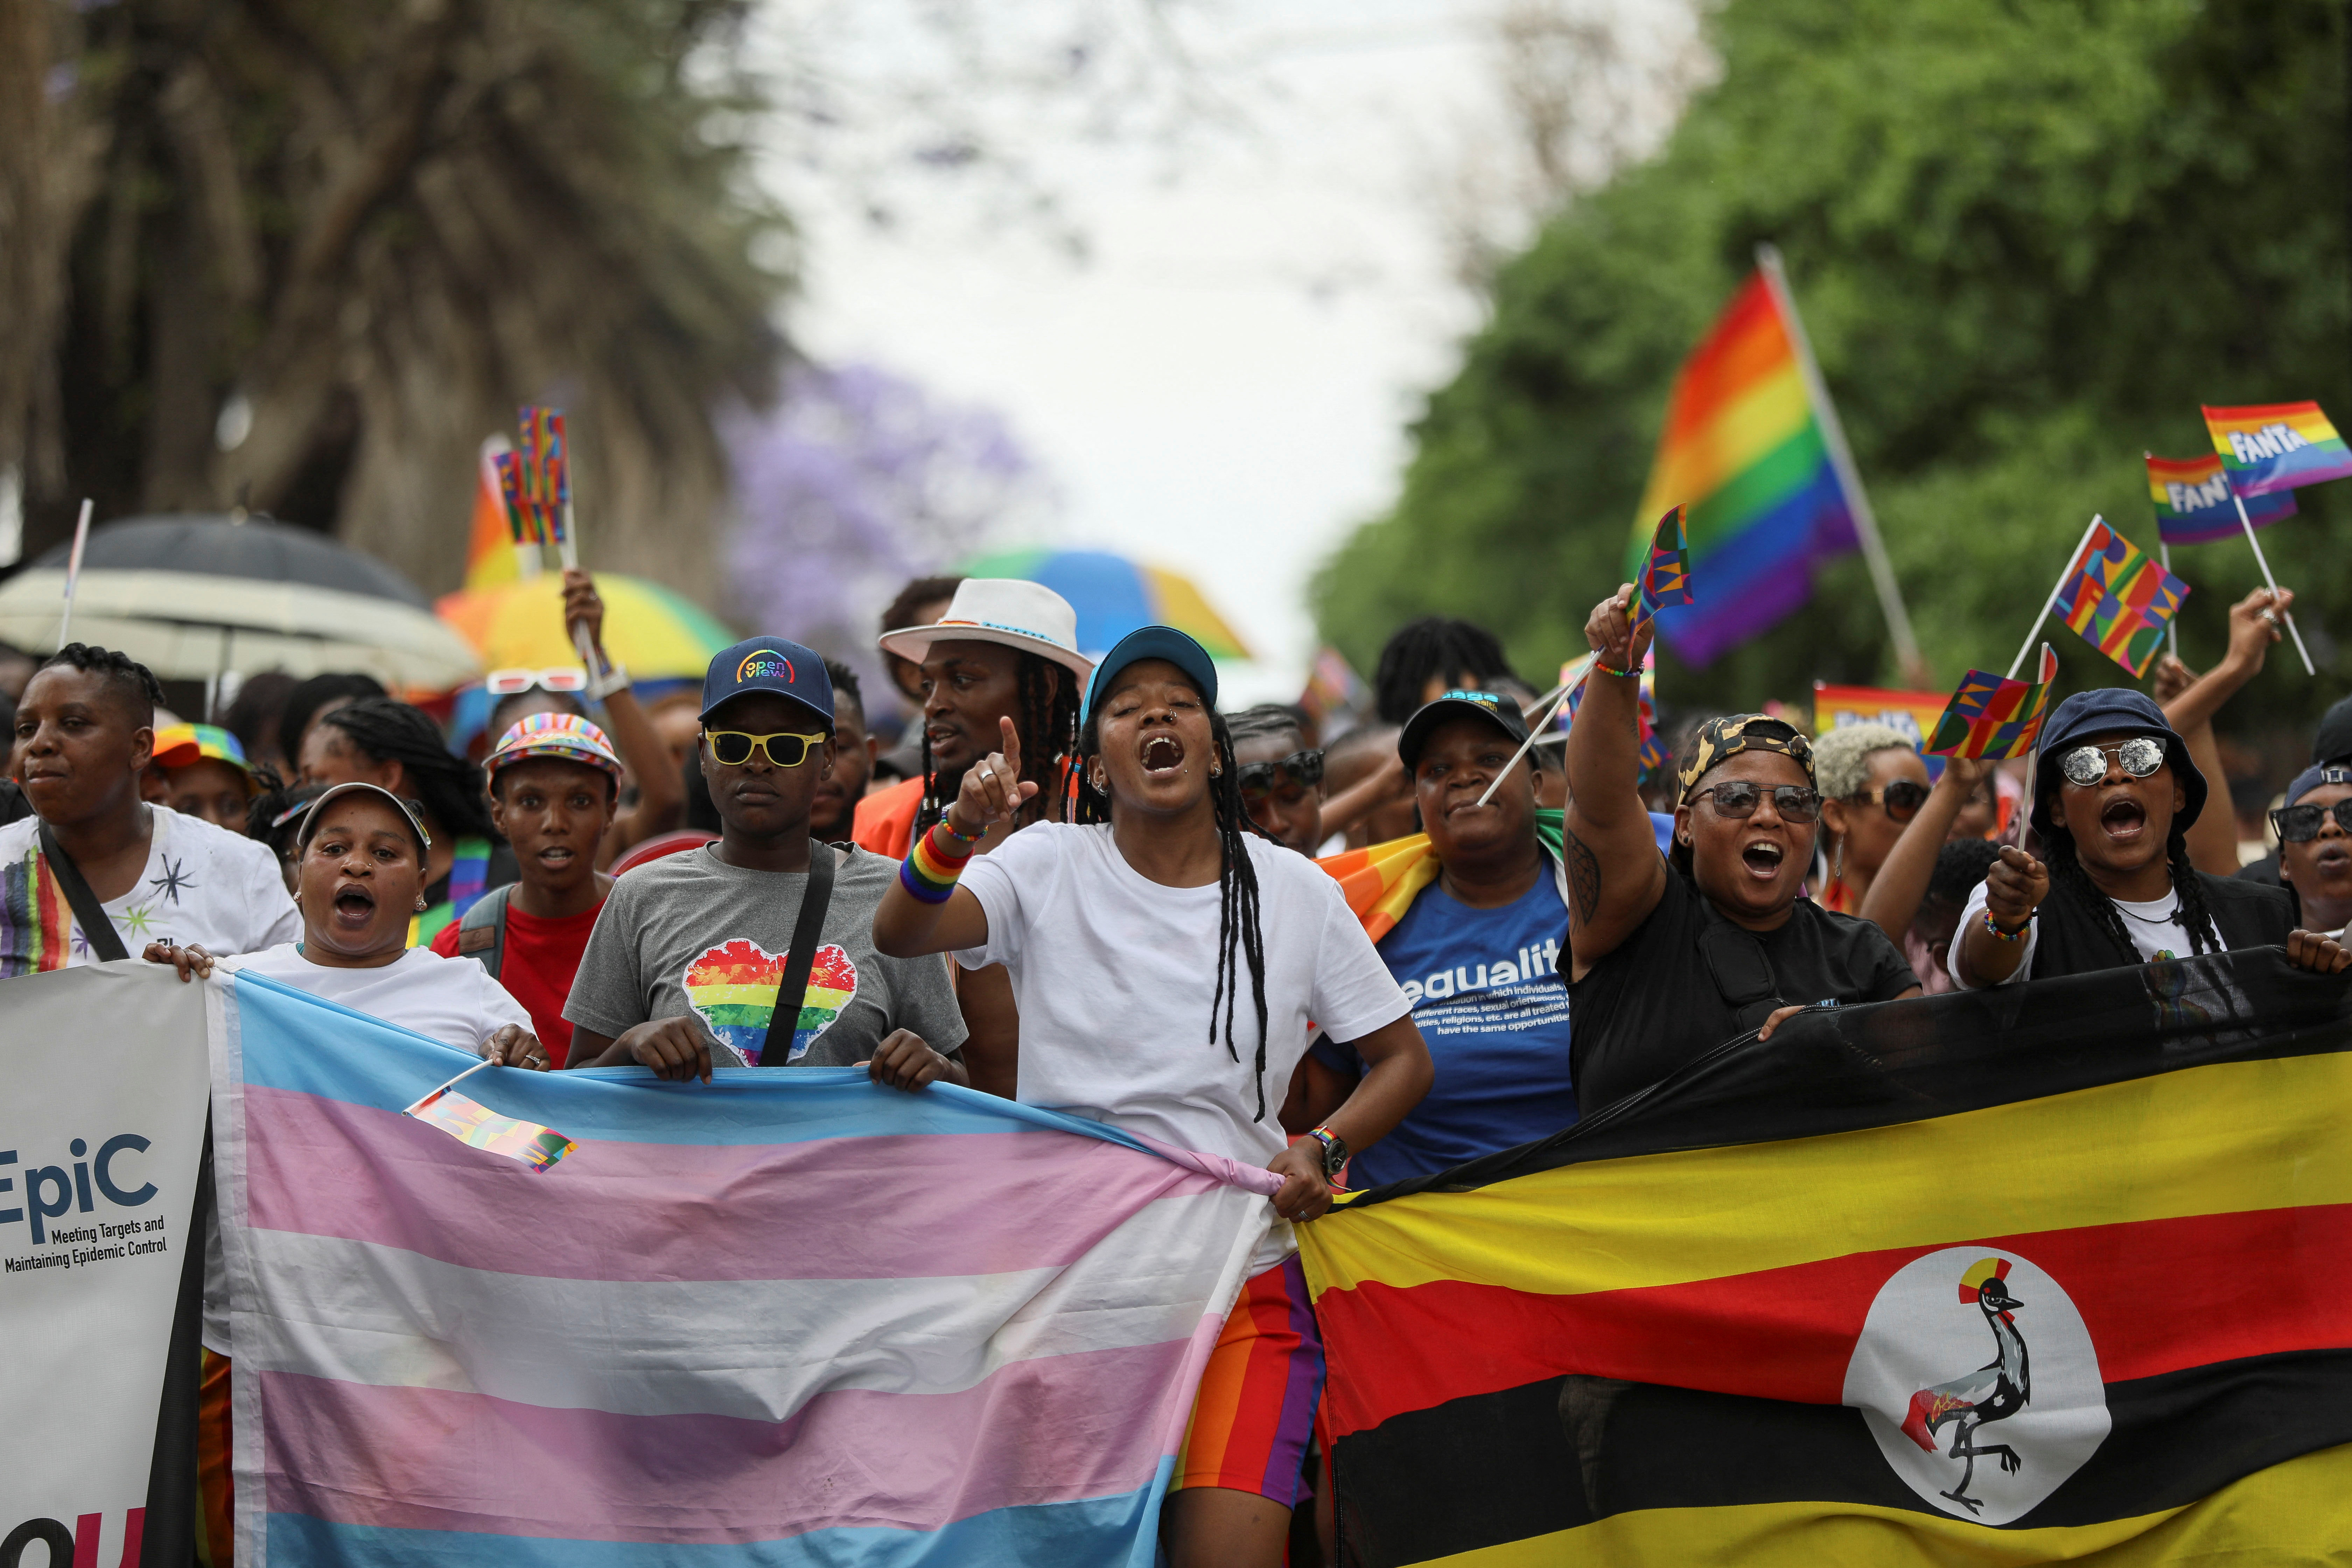 People march in celebration of LGBTQ+ rights at the annual Pride Parade in Johannesburg